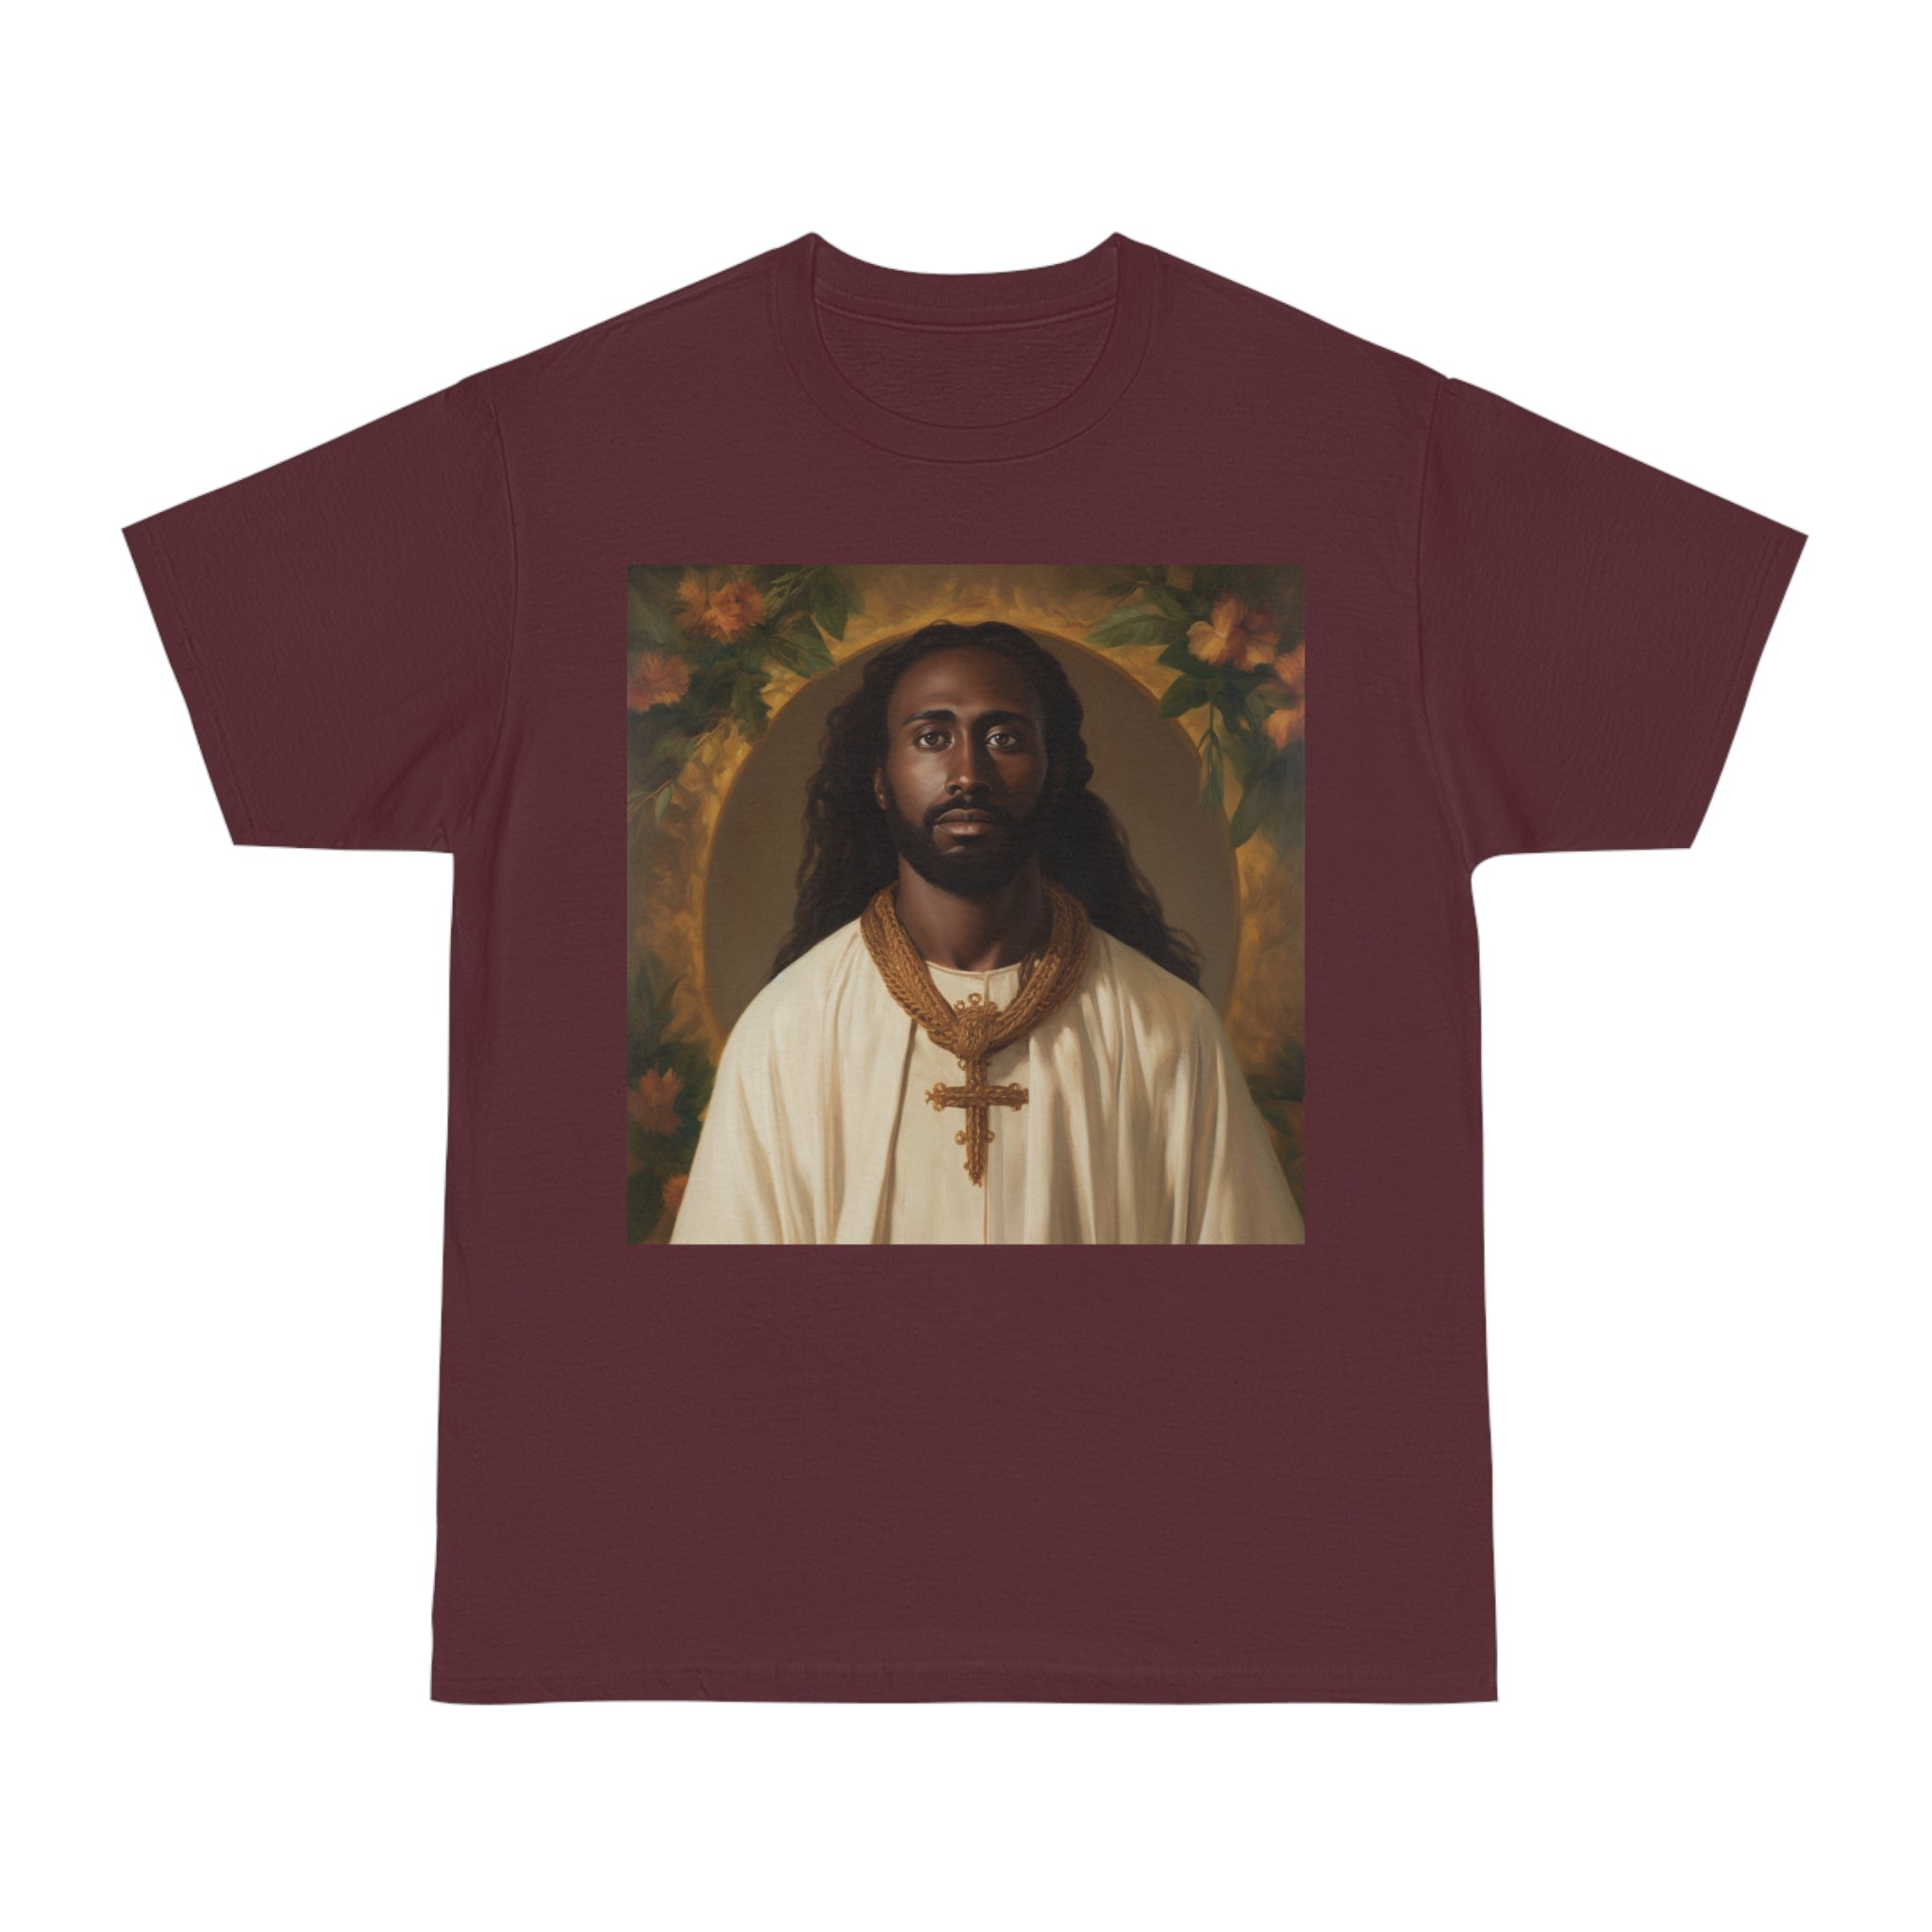 This image displays a high-quality unisex Hammer™ T-shirt featuring an inspiring design based on a Mormon painting of Jesus of African descent. The t-shirt is presented in a neutral color that highlights the detailed and vibrant artwork, designed to resonate with a wide audience and celebrate diversity in spirituality.